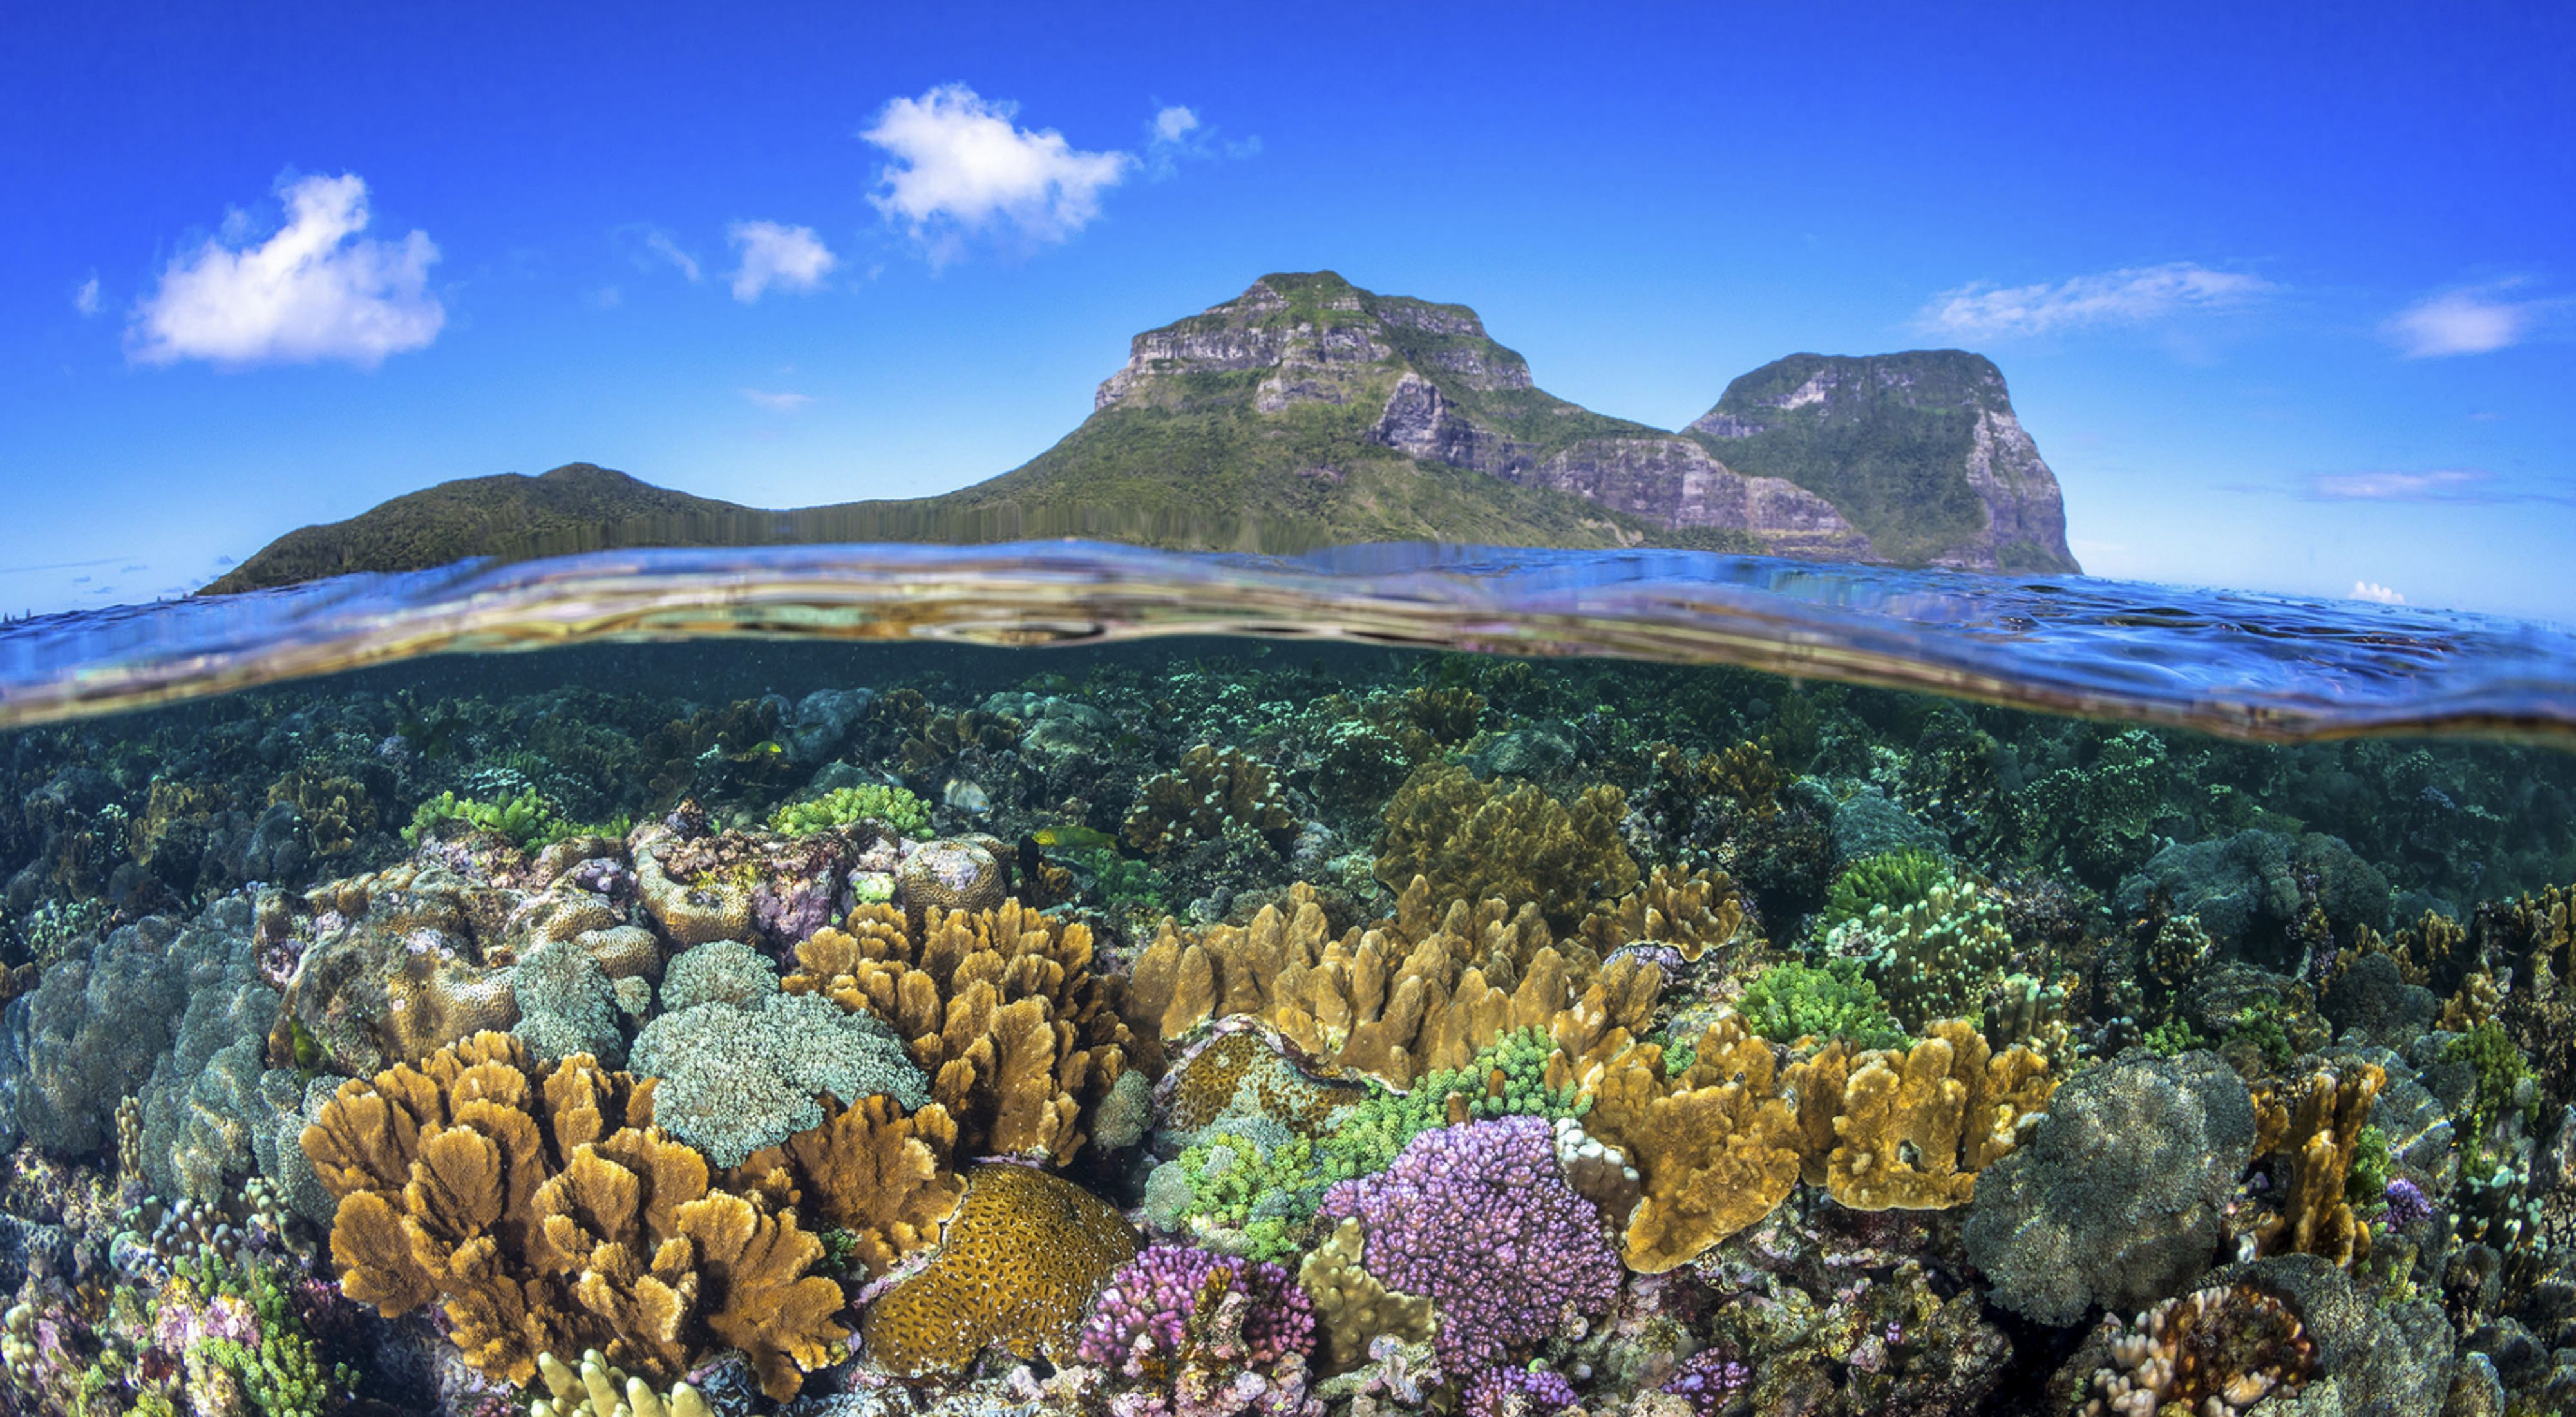 A view half above water showing a mountainous island and half below water showing a colorful, healthy coral reef